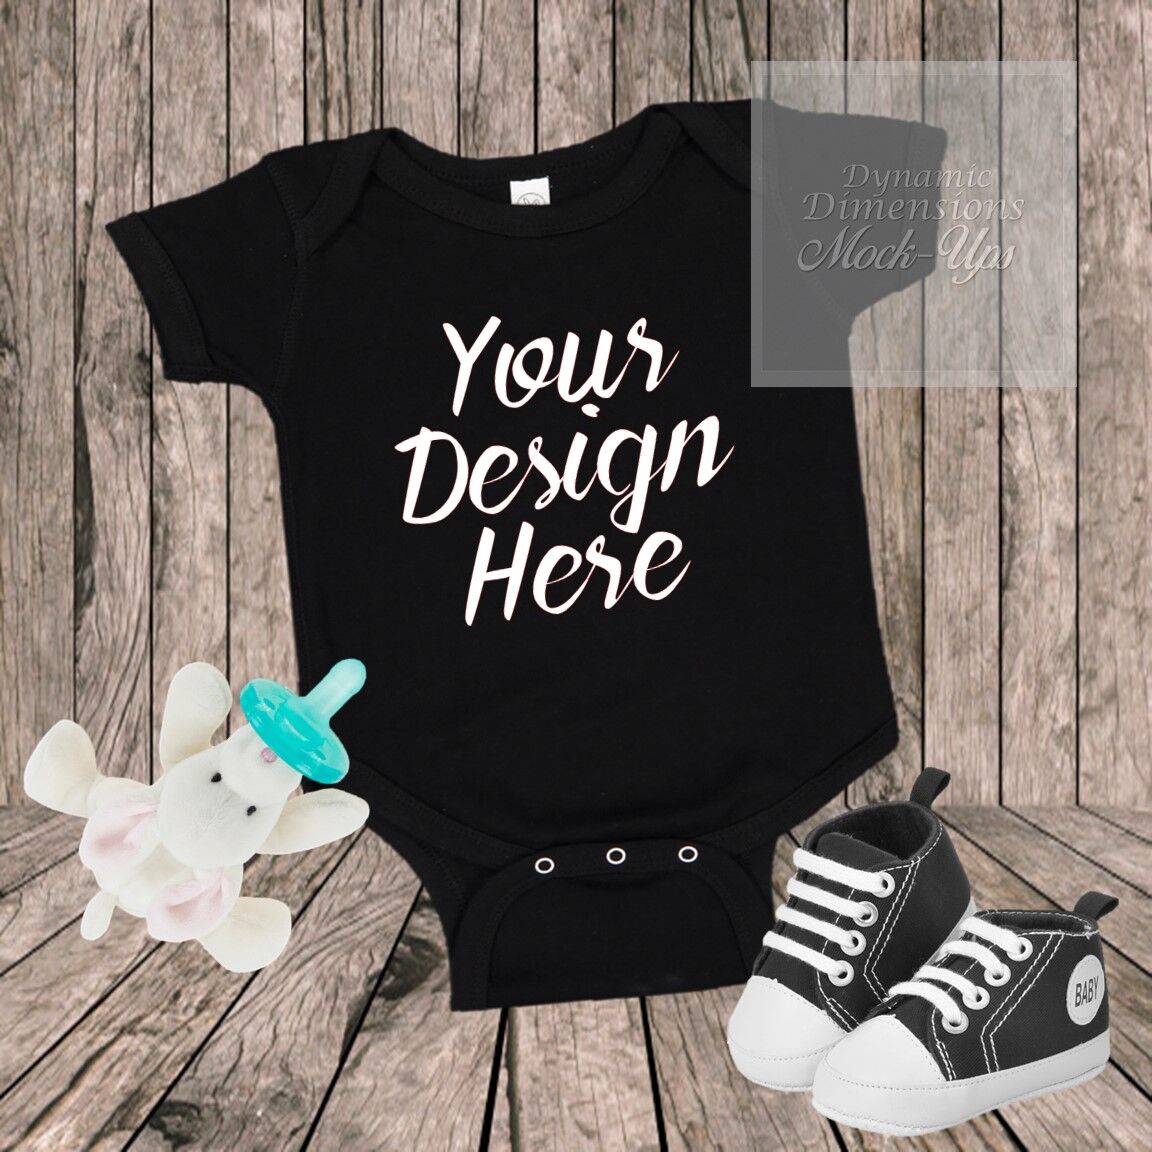 Download Blank Black Baby Onesie Mockup, Fashion Design Styled Stock Photograp By Dynamic Dimensions ...